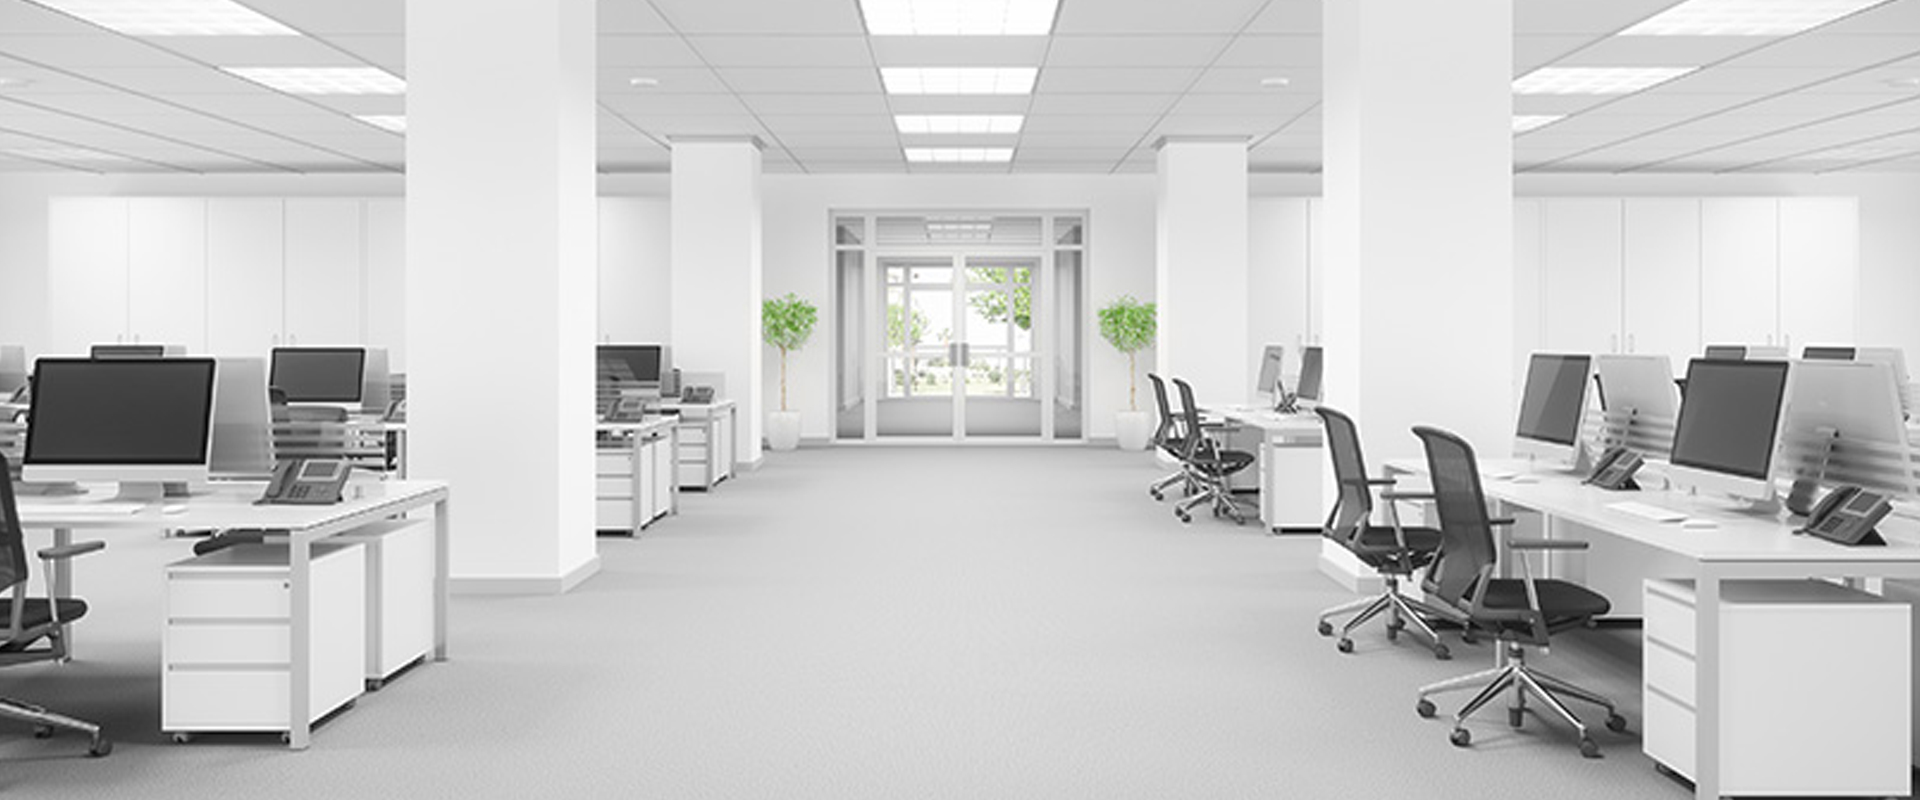 Feton LED Antimicrobial Light In Office